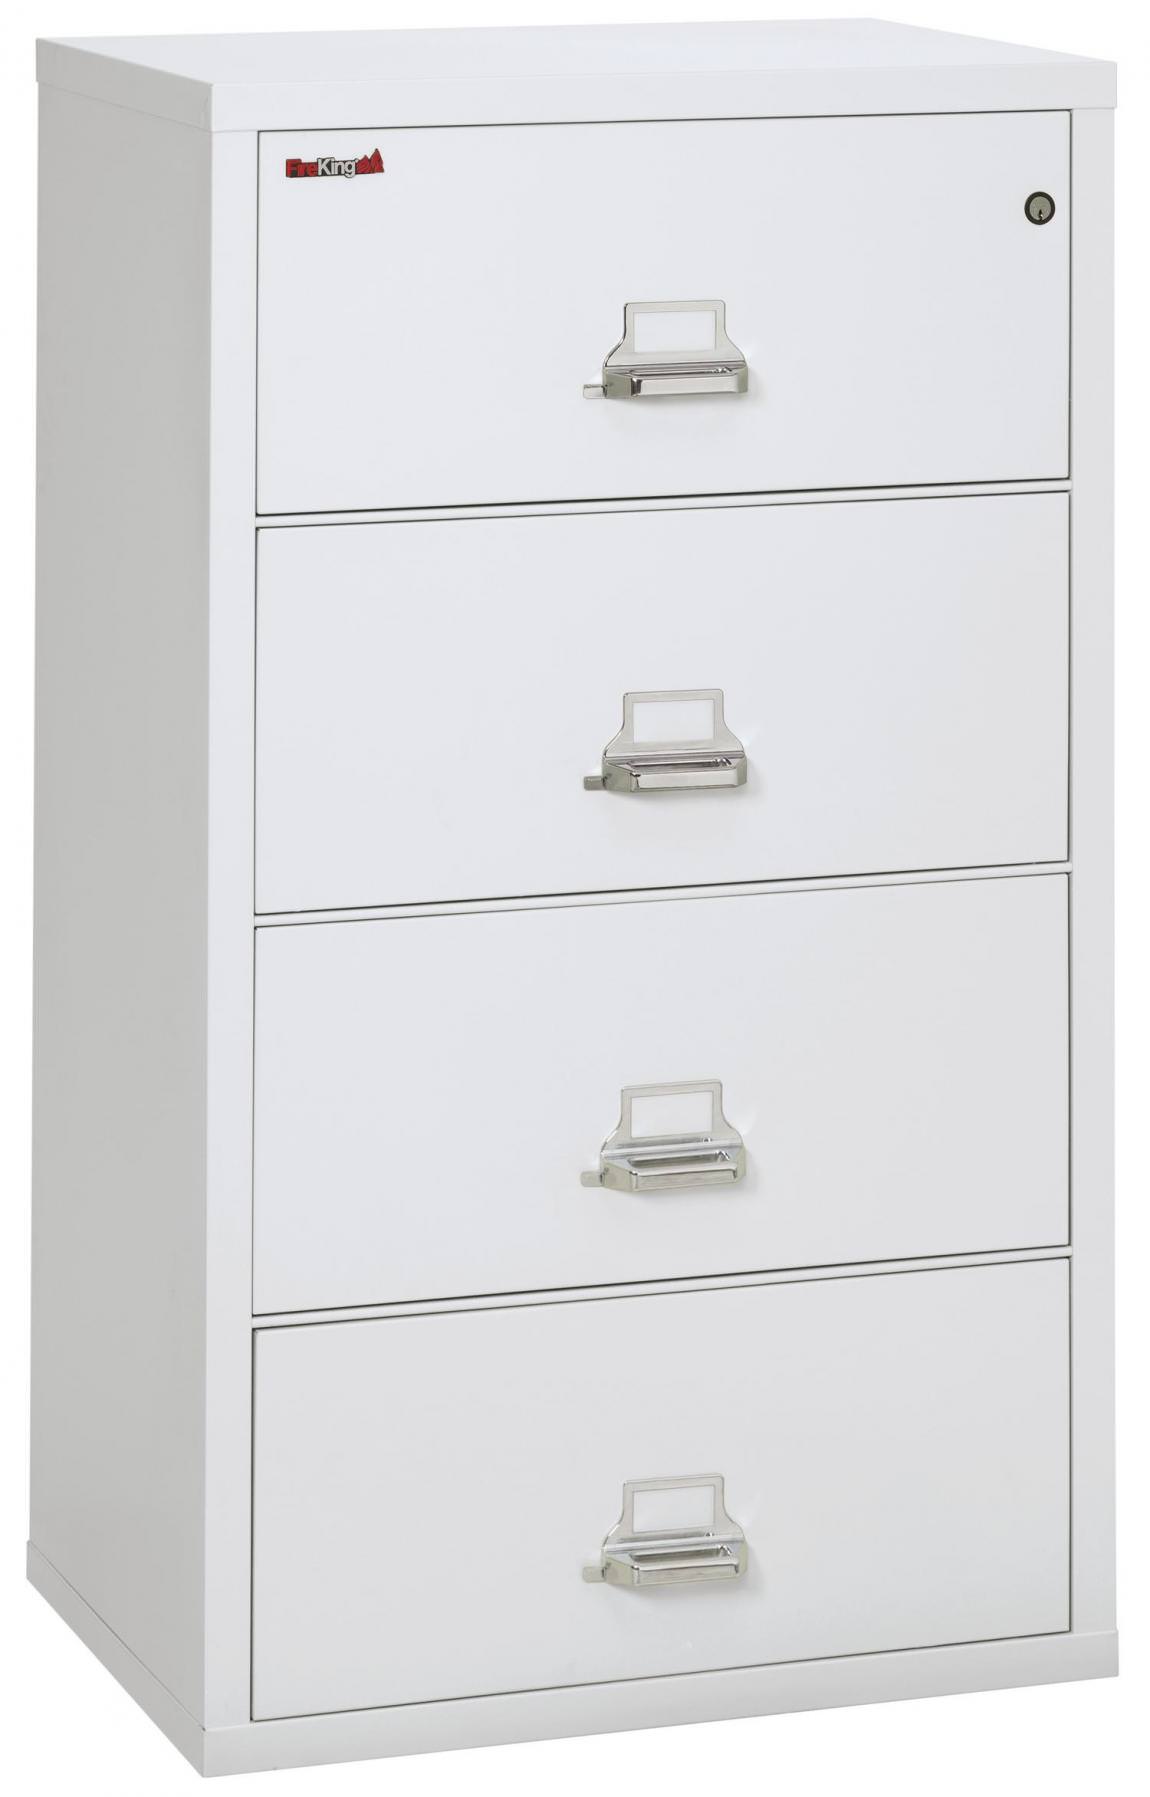 4 Drawer Fireproof Lateral File Cabinet - 31 Inch